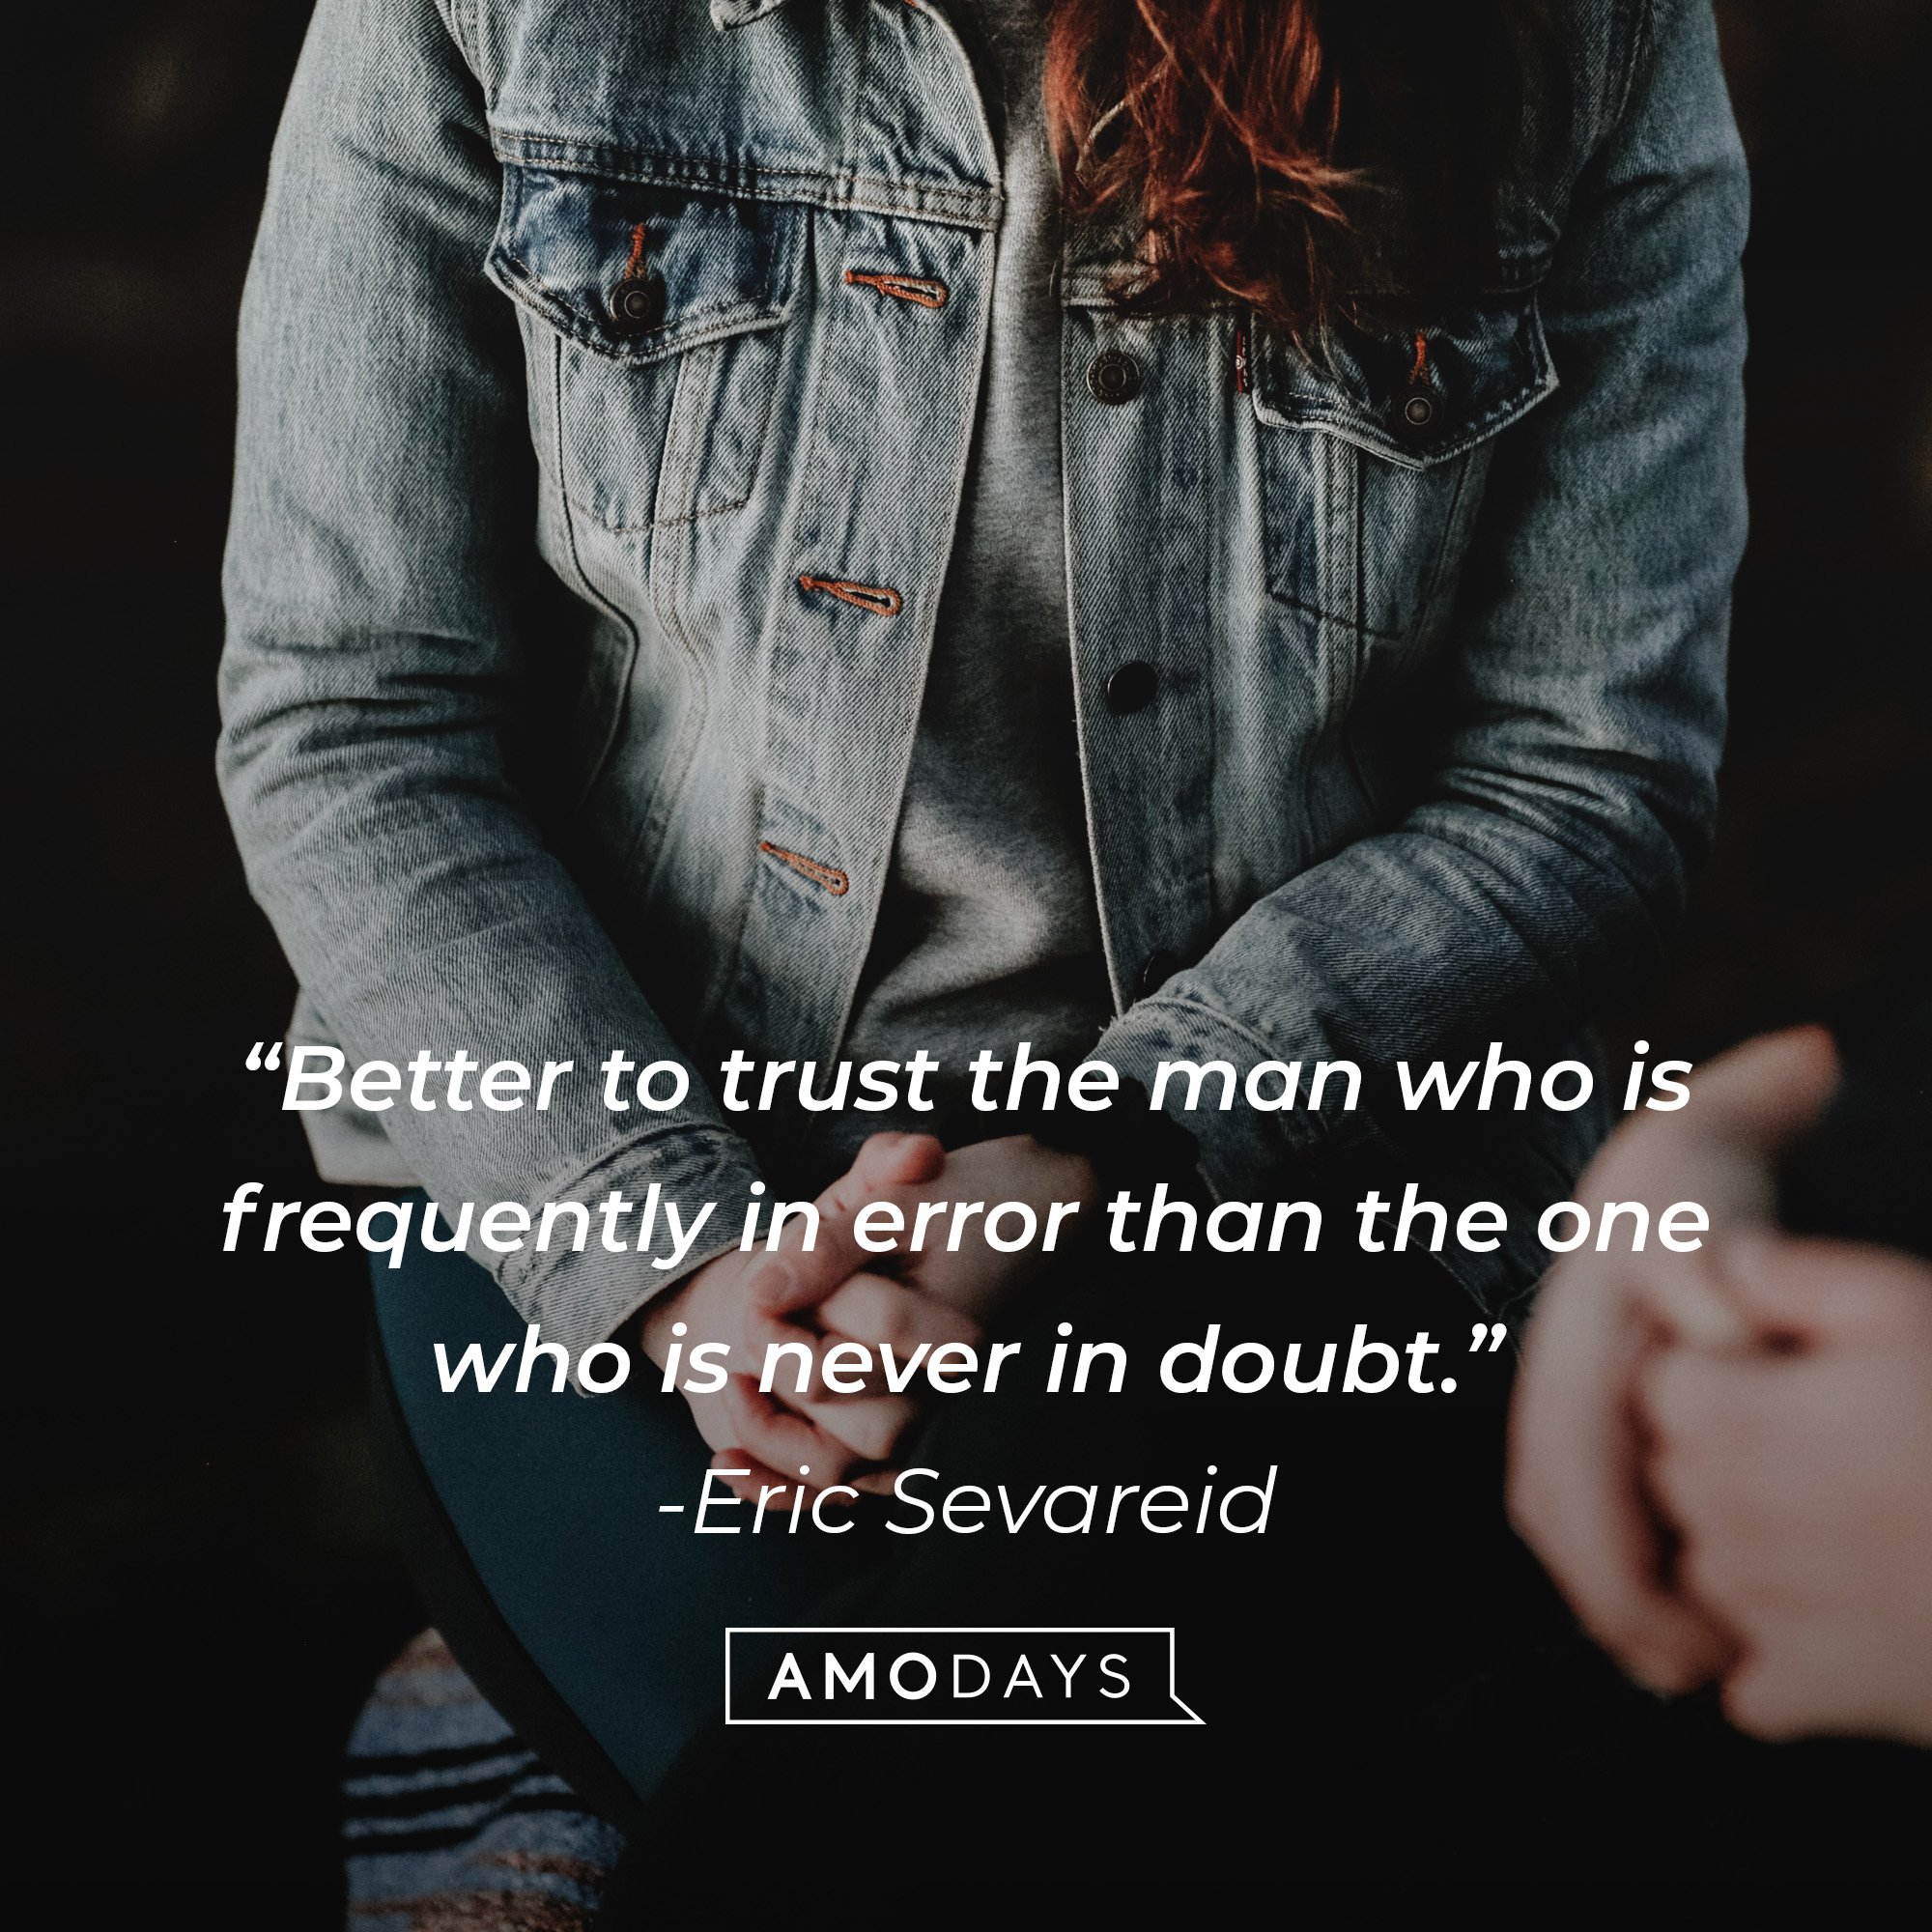 Eric Sevareid’s quote: “Better to trust the man who is frequently in error than the one who is never in doubt.” | Image: AmoDays 